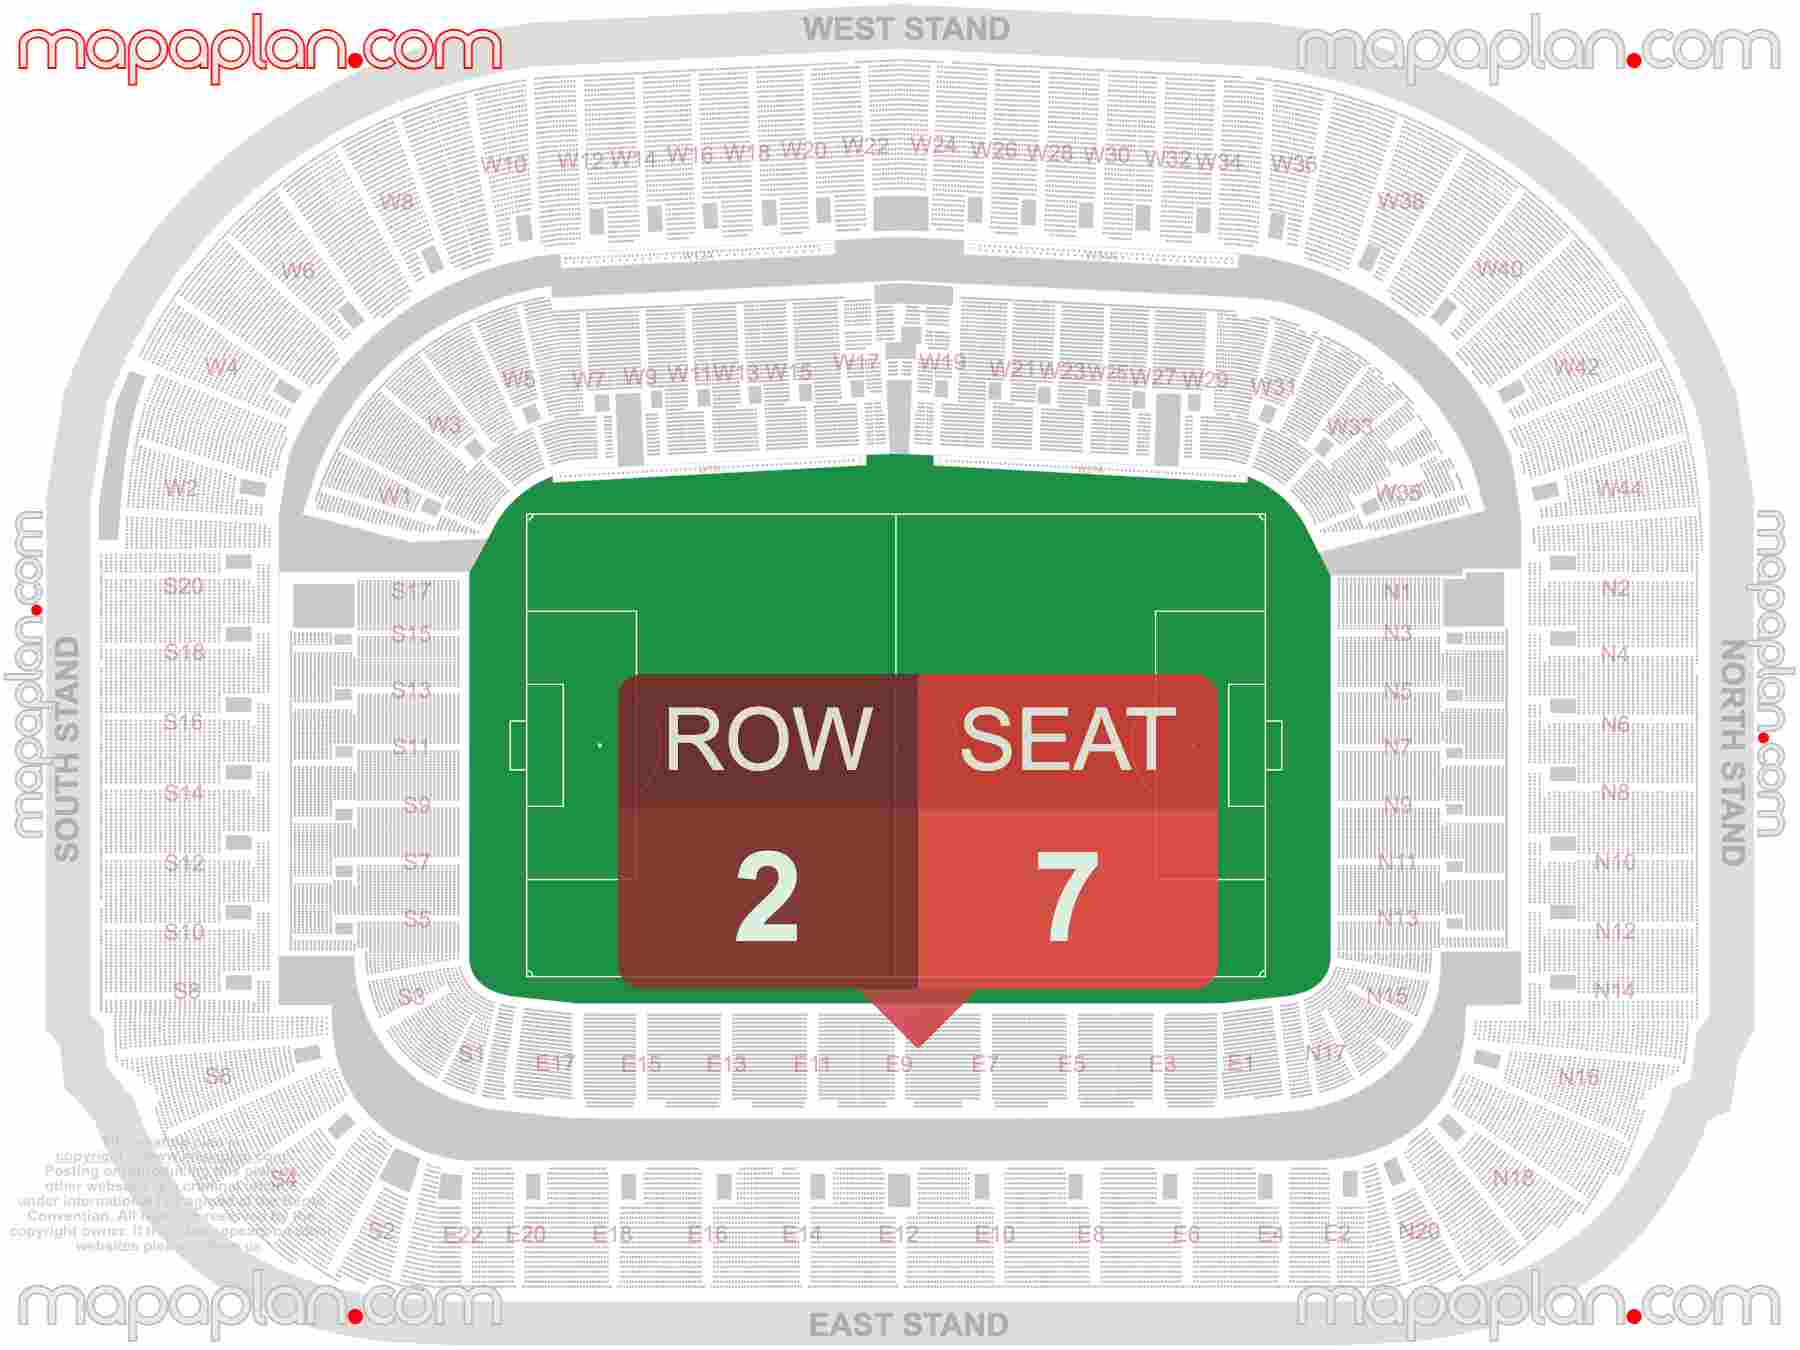 Edinburgh Scottish Gas Murrayfield Stadium seating plan Football & Rugby detailed seat numbers and row numbering plan with interactive map chart layout